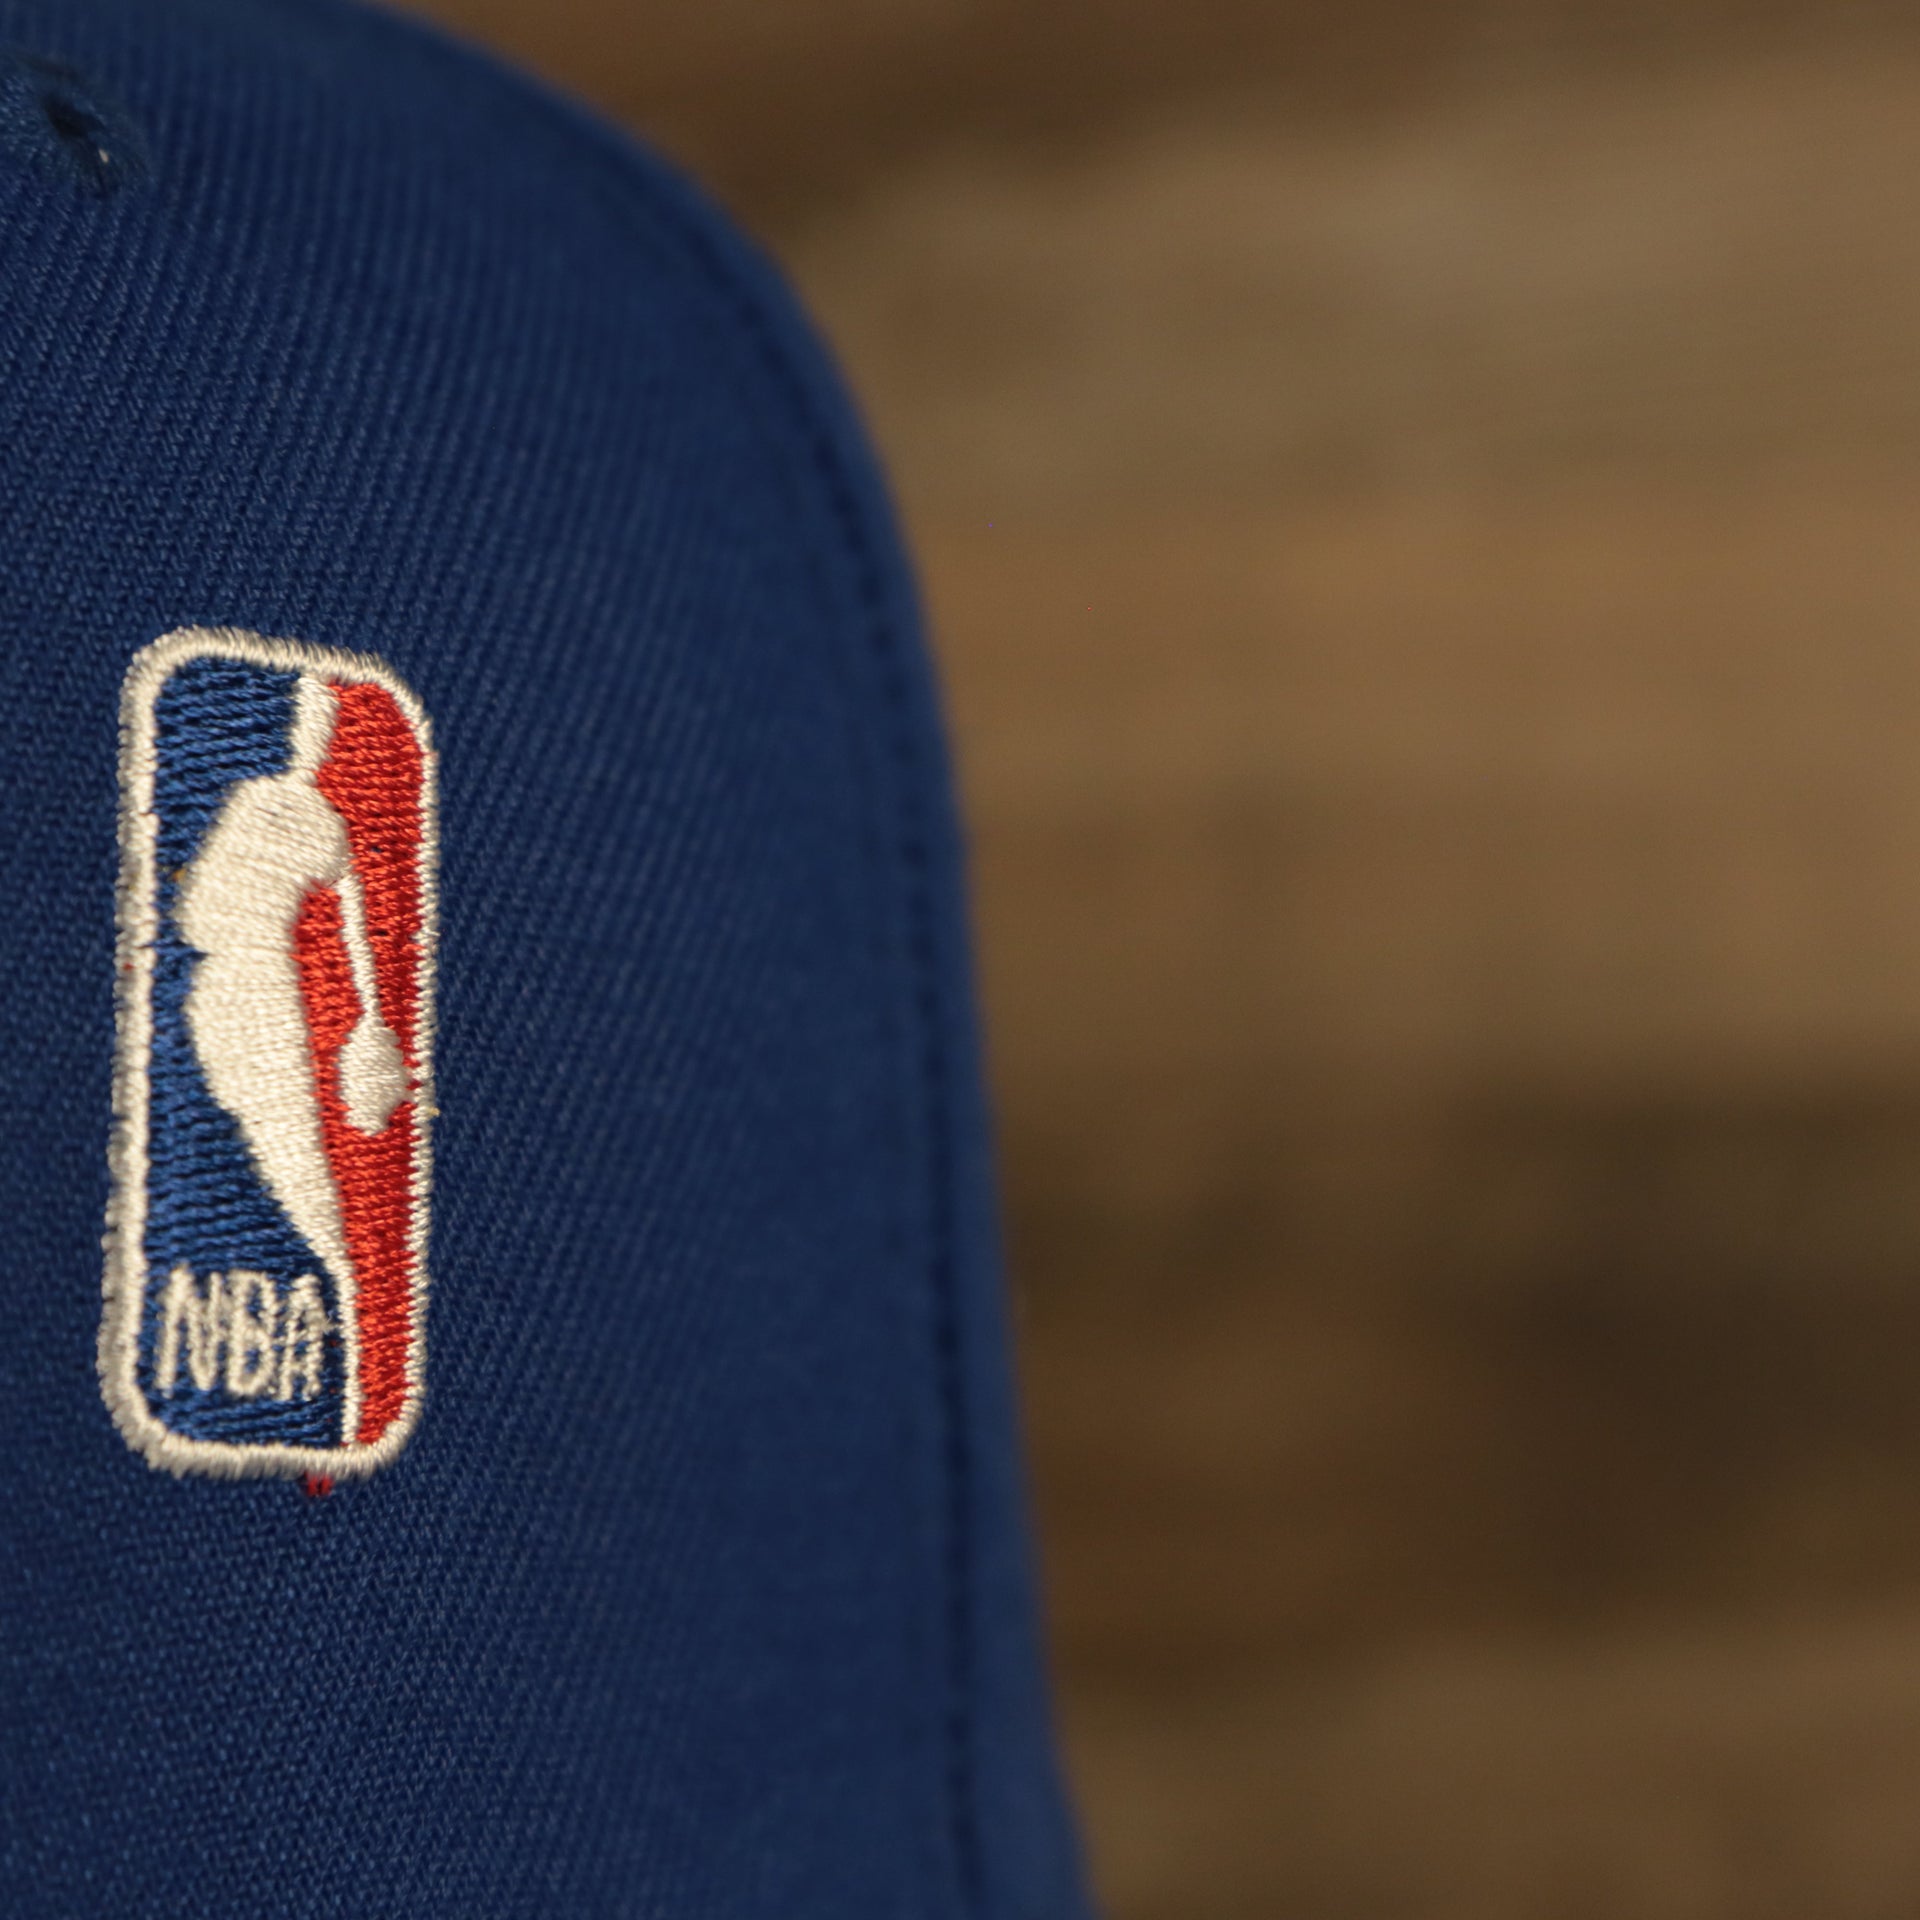 nba logo up close Philadelphia 76ers "Championship Rings" All Over Side Patch Gray Bottom 59FIFTY Fitted Cap